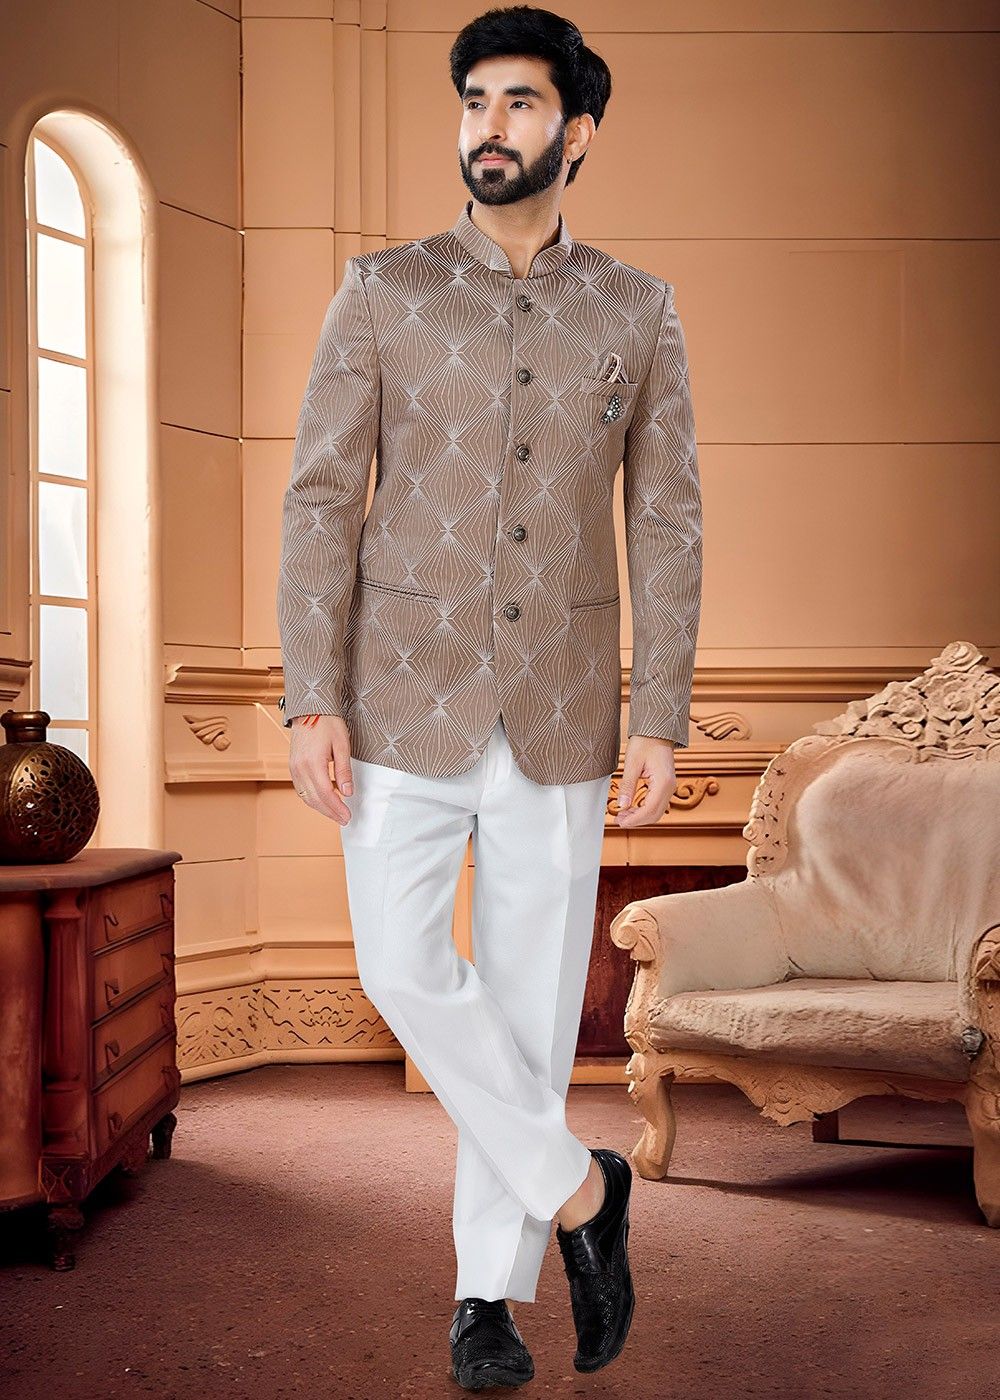 Kurta Designs for Men to Style in Different Occasions